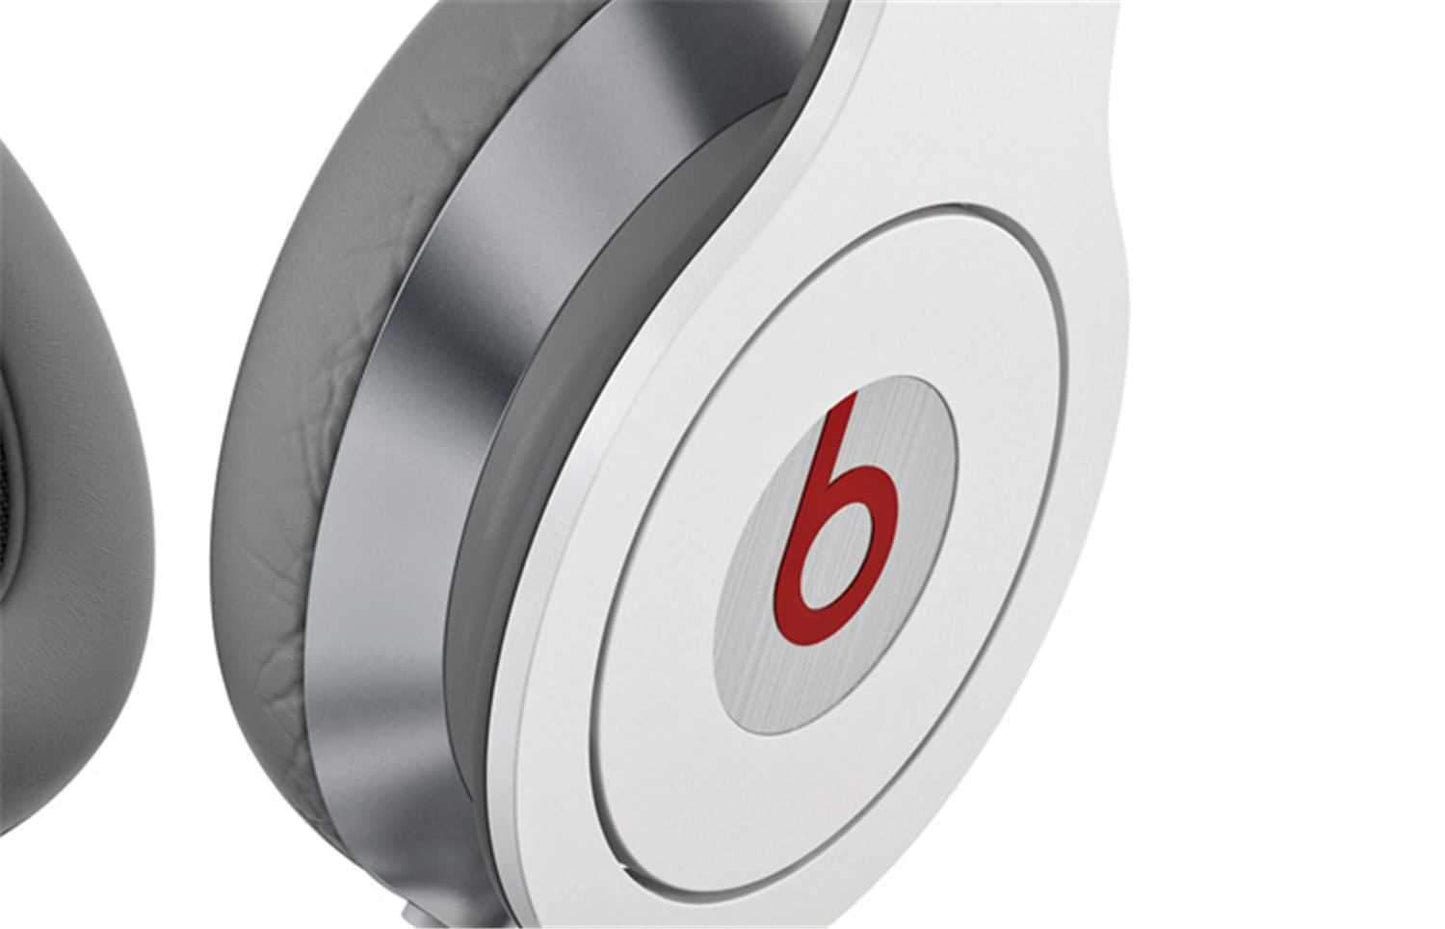 Monster Beats Solo By Dr Dre HD Headphones - White - PSSL ProSound and Stage Lighting